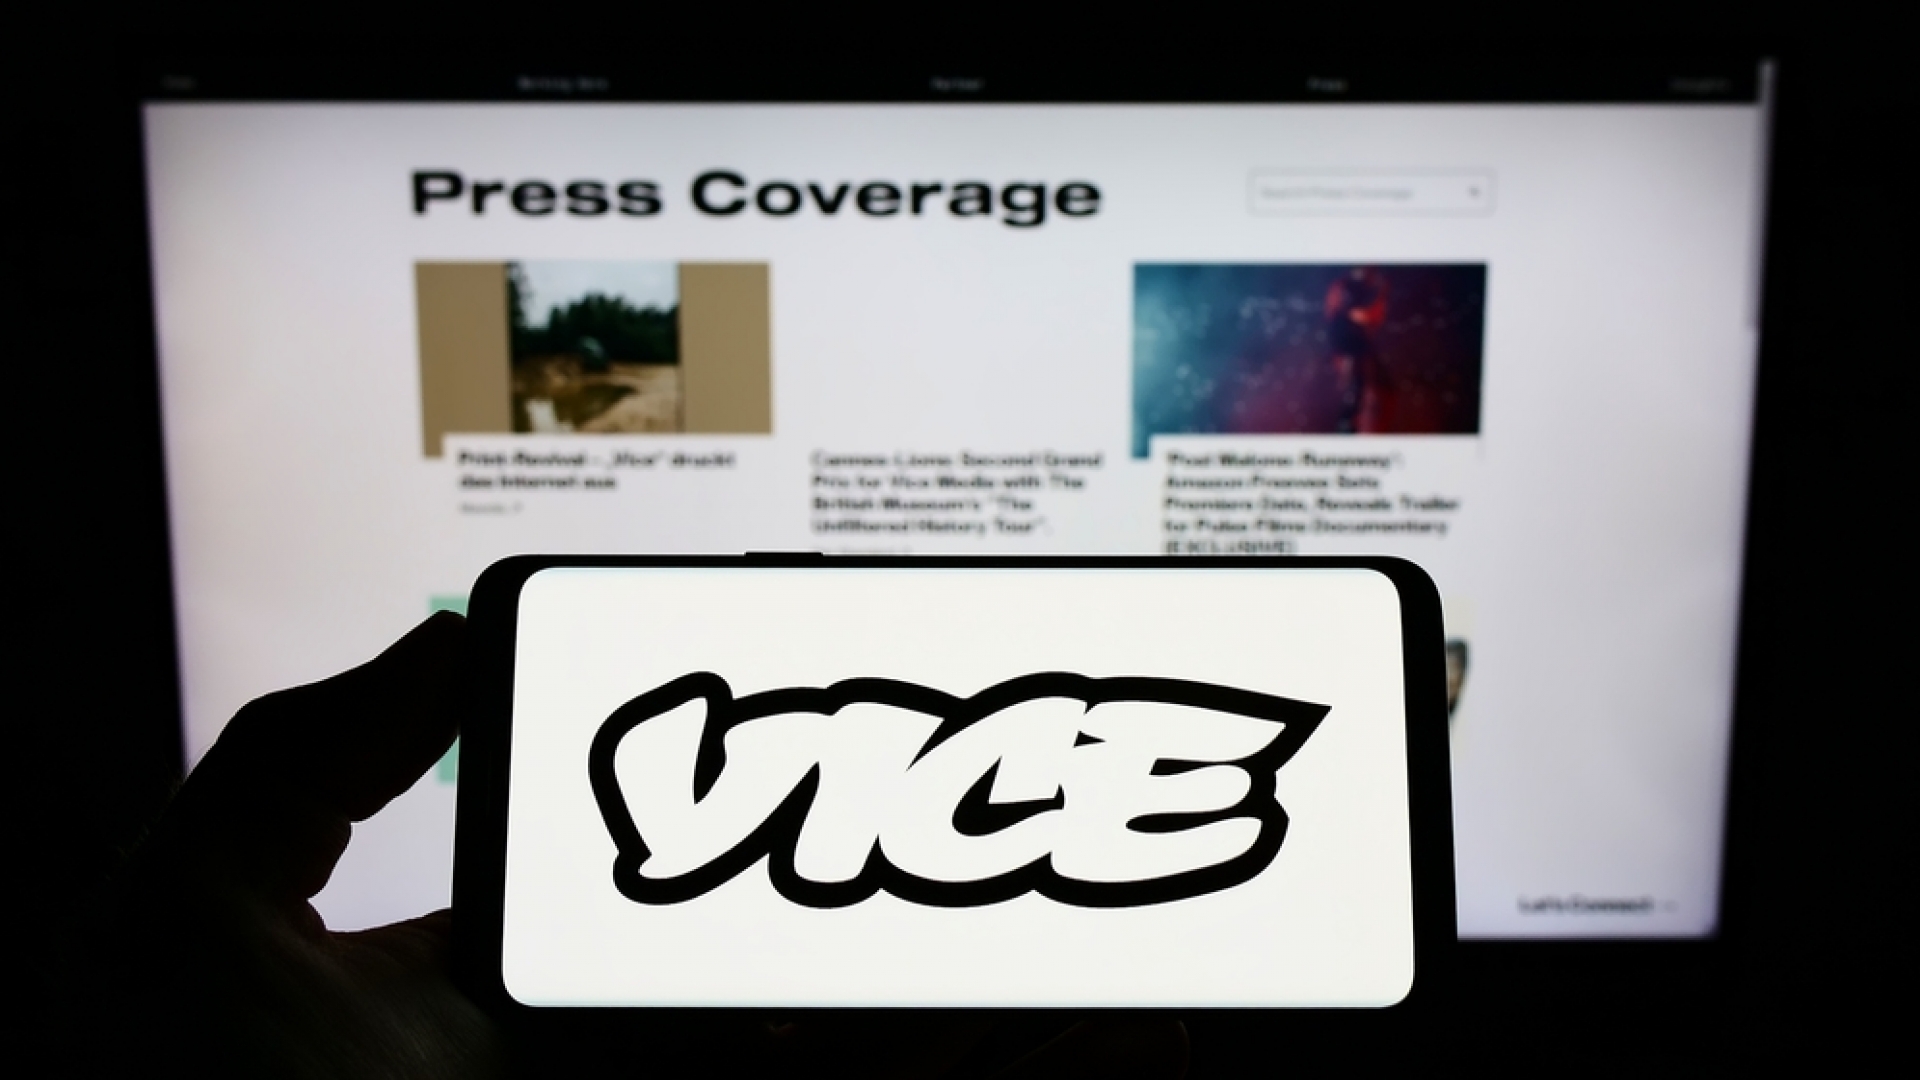 Vice Media to be acquired by buyers from Fortress Investment Group